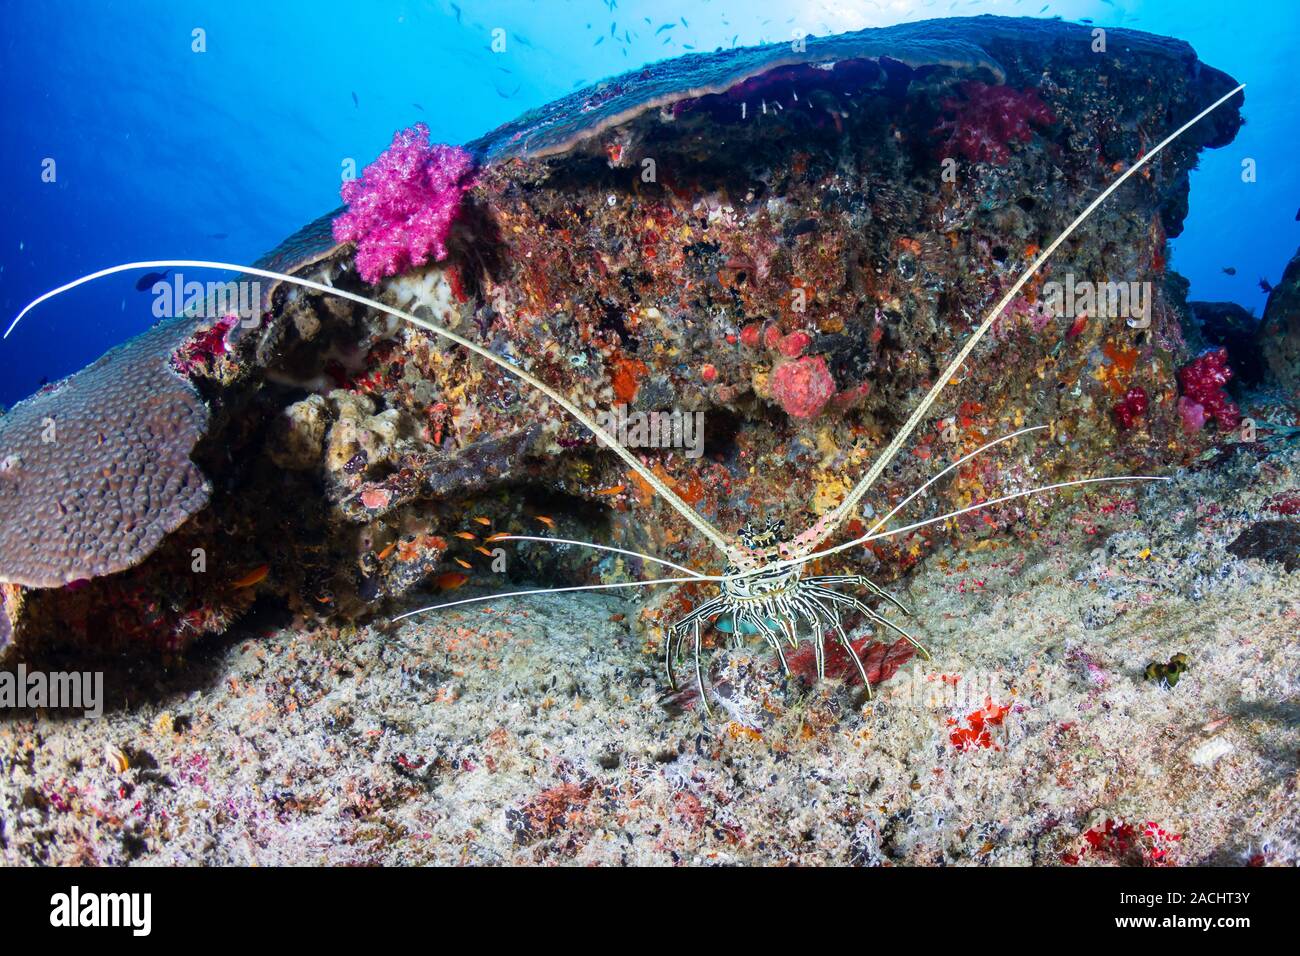 Large Lobster under a ledge on a tropical coral reef Stock Photo